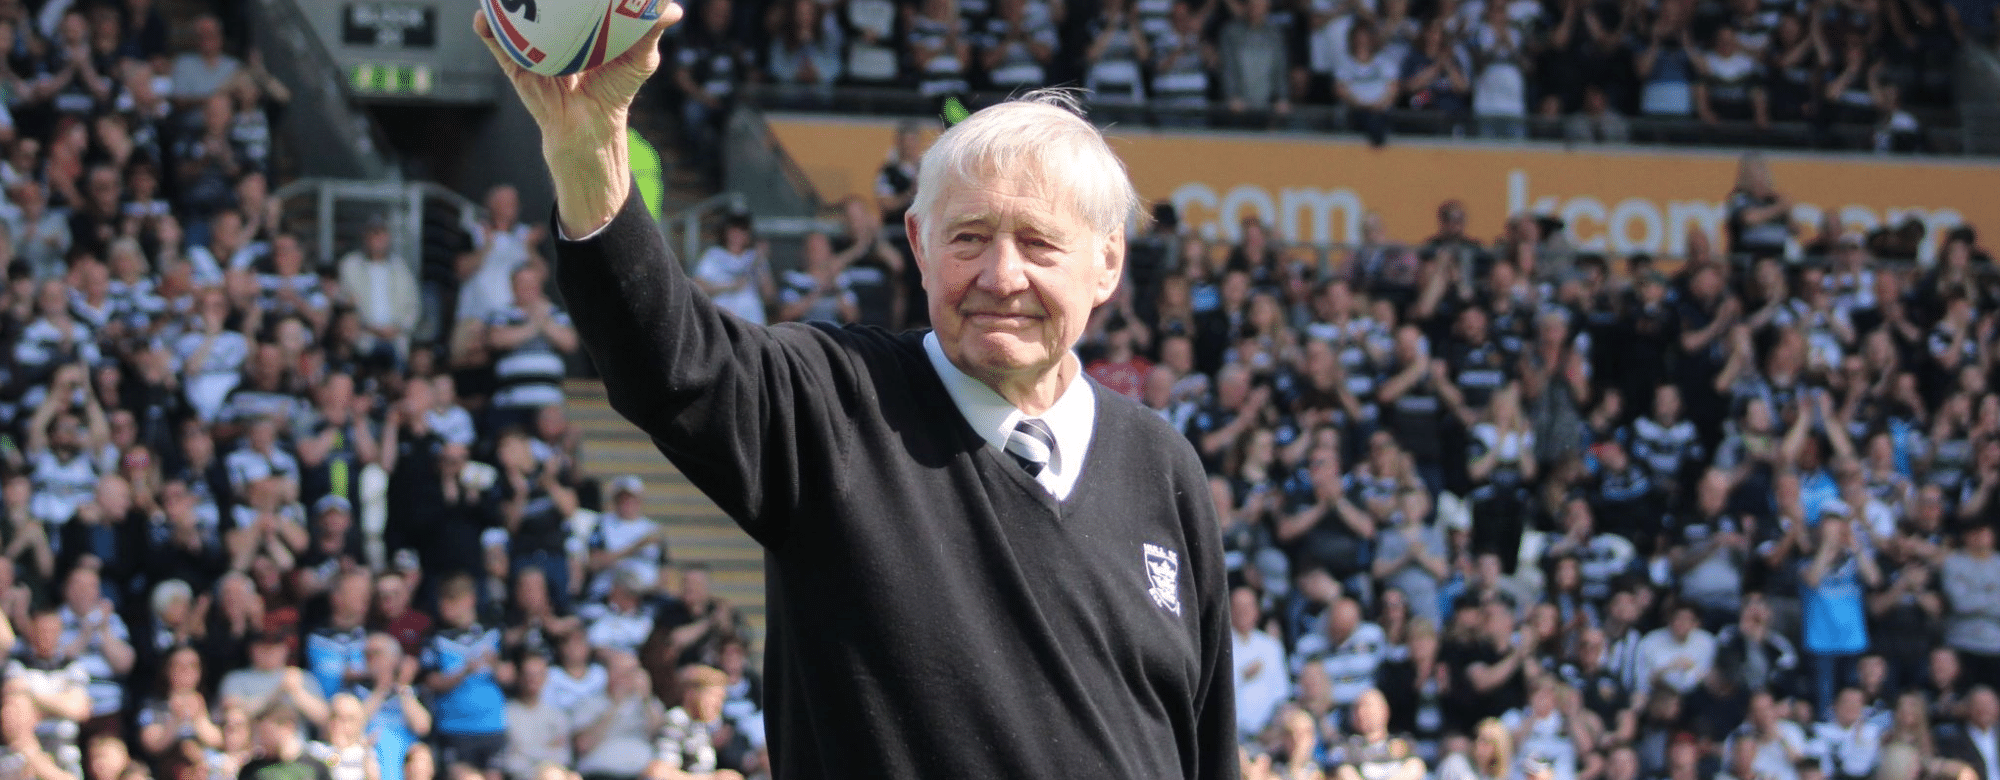 The Remarkable Playing & Coaching Career of Johnny Whiteley MBE